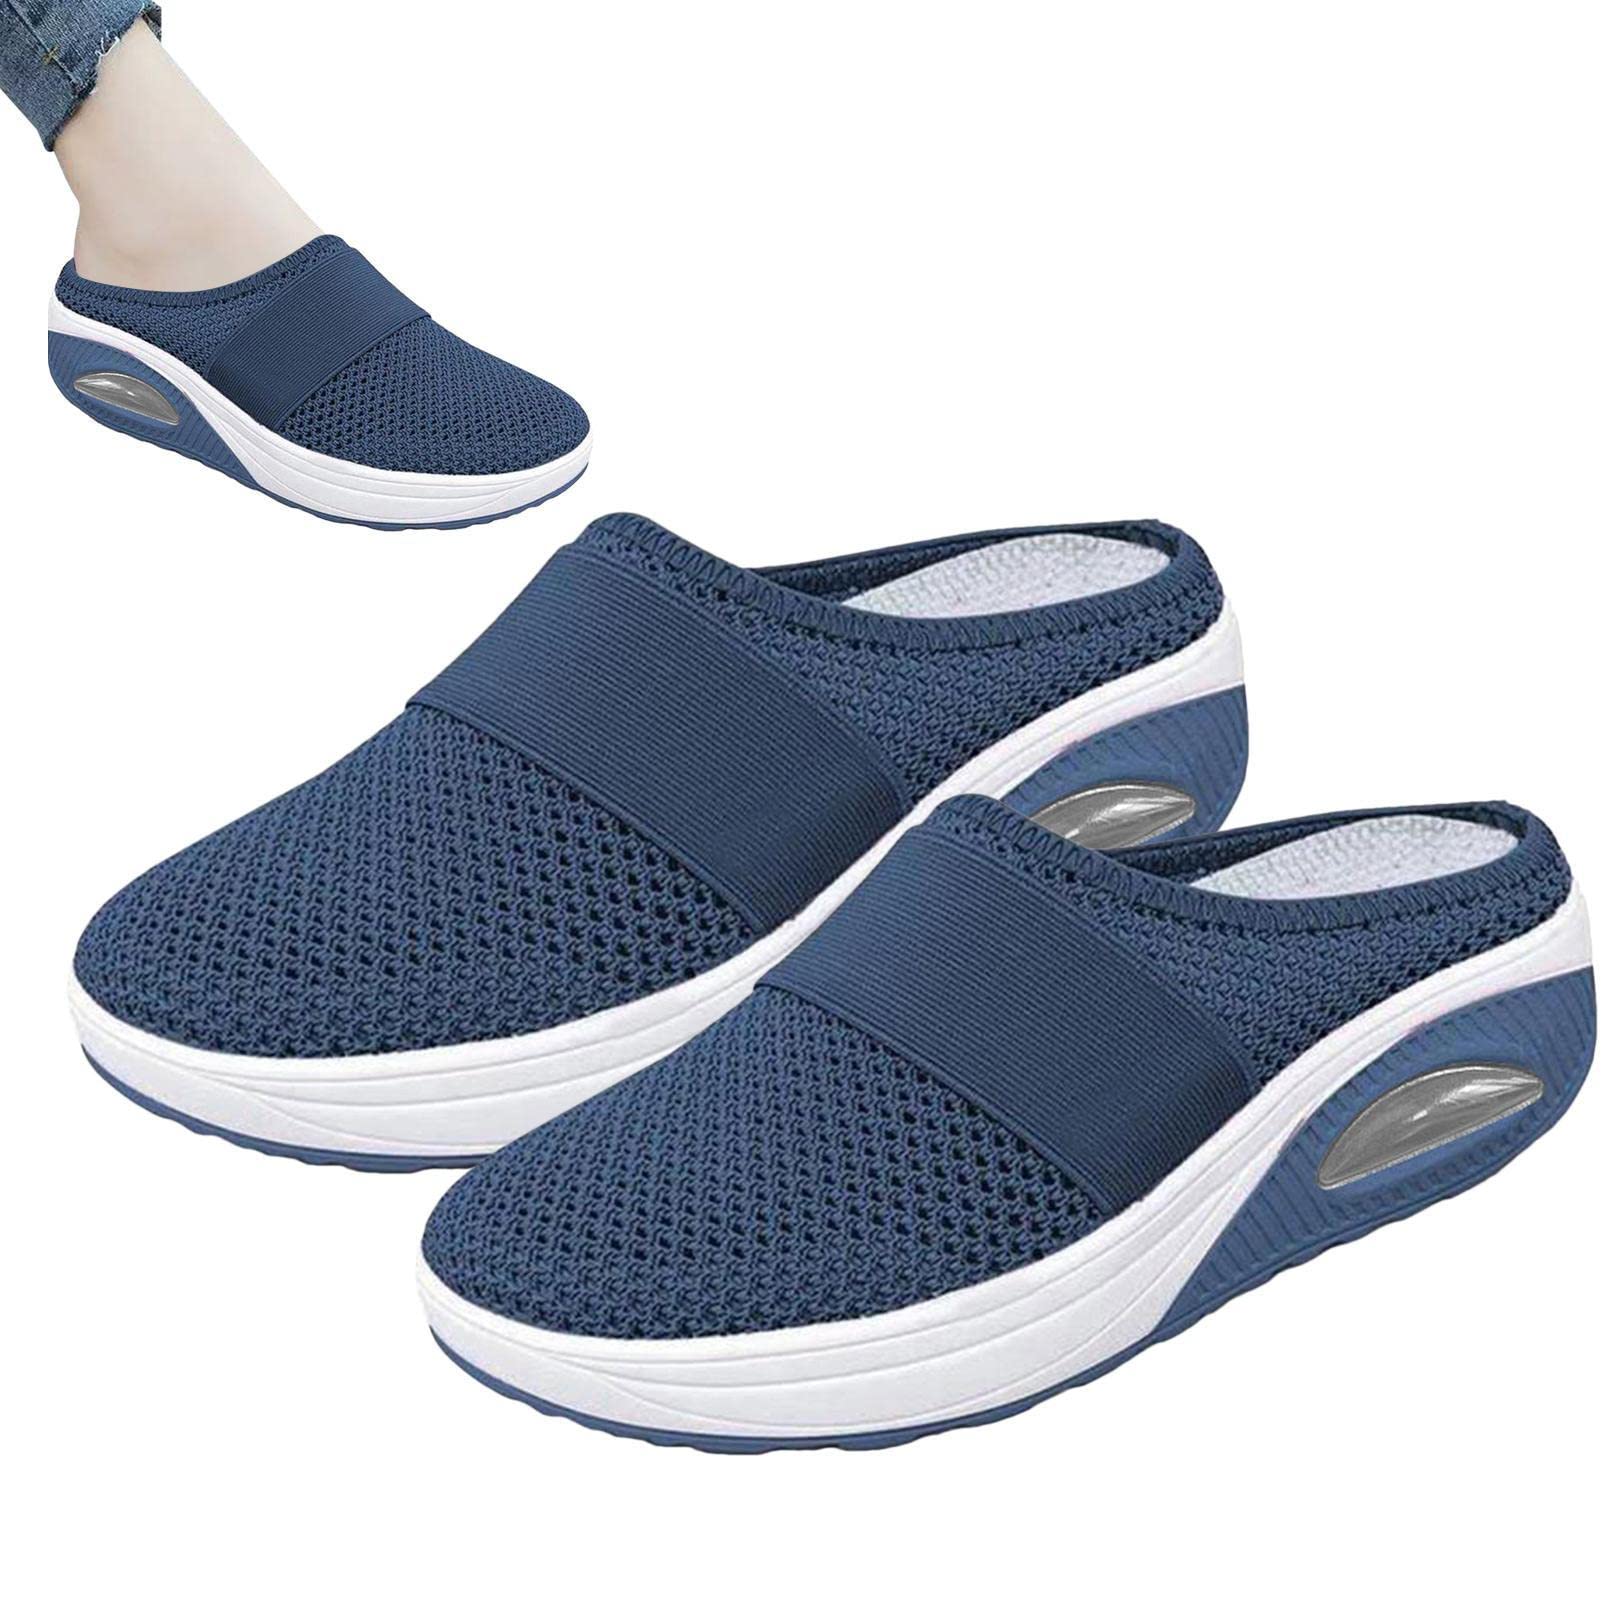 Arch Support Shoes